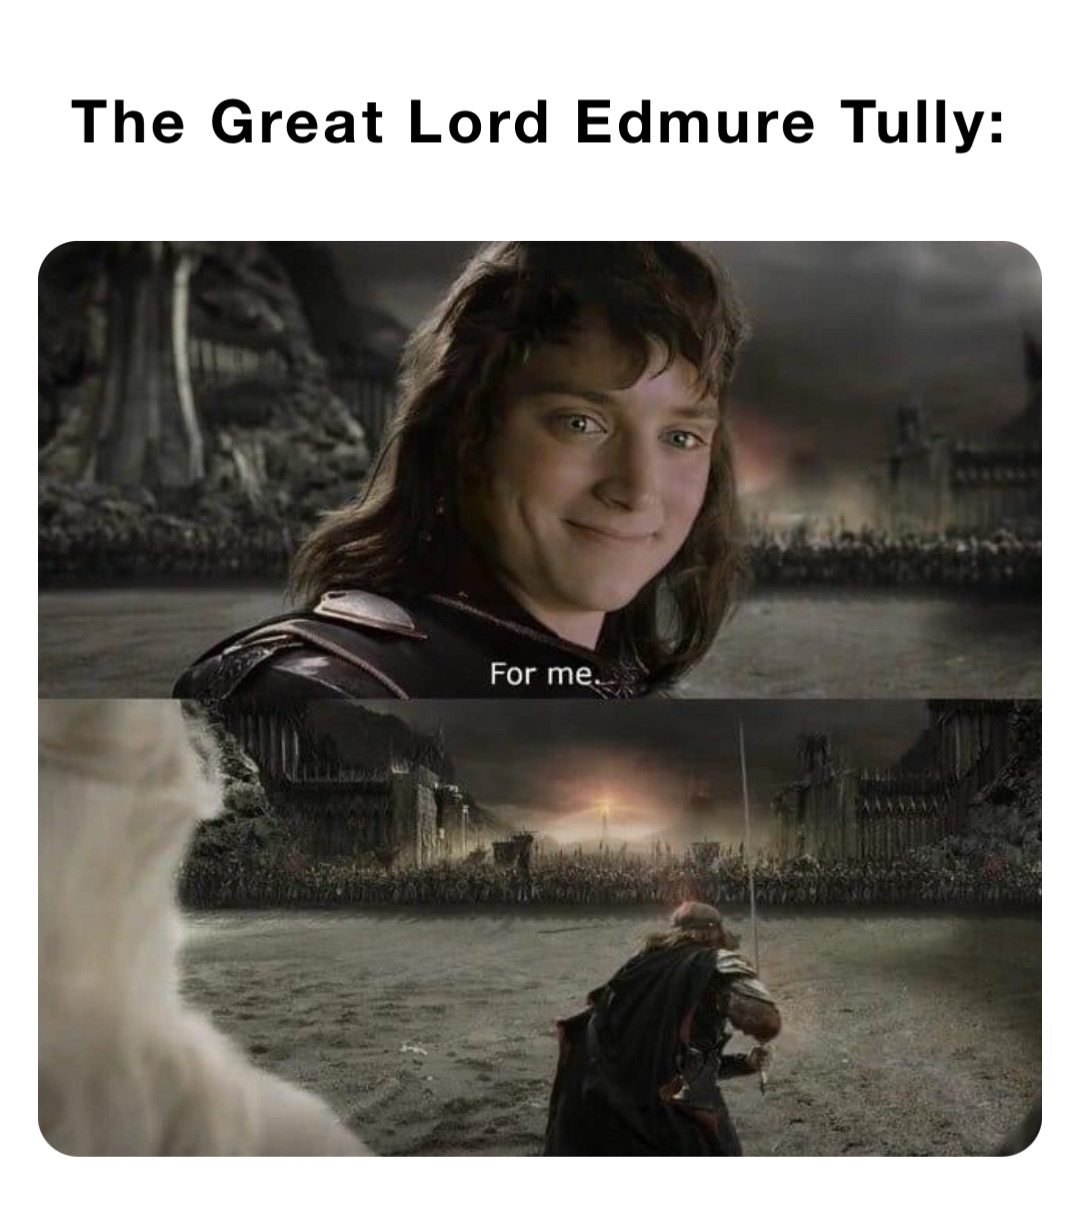 The Great Lord Edmure Tully: